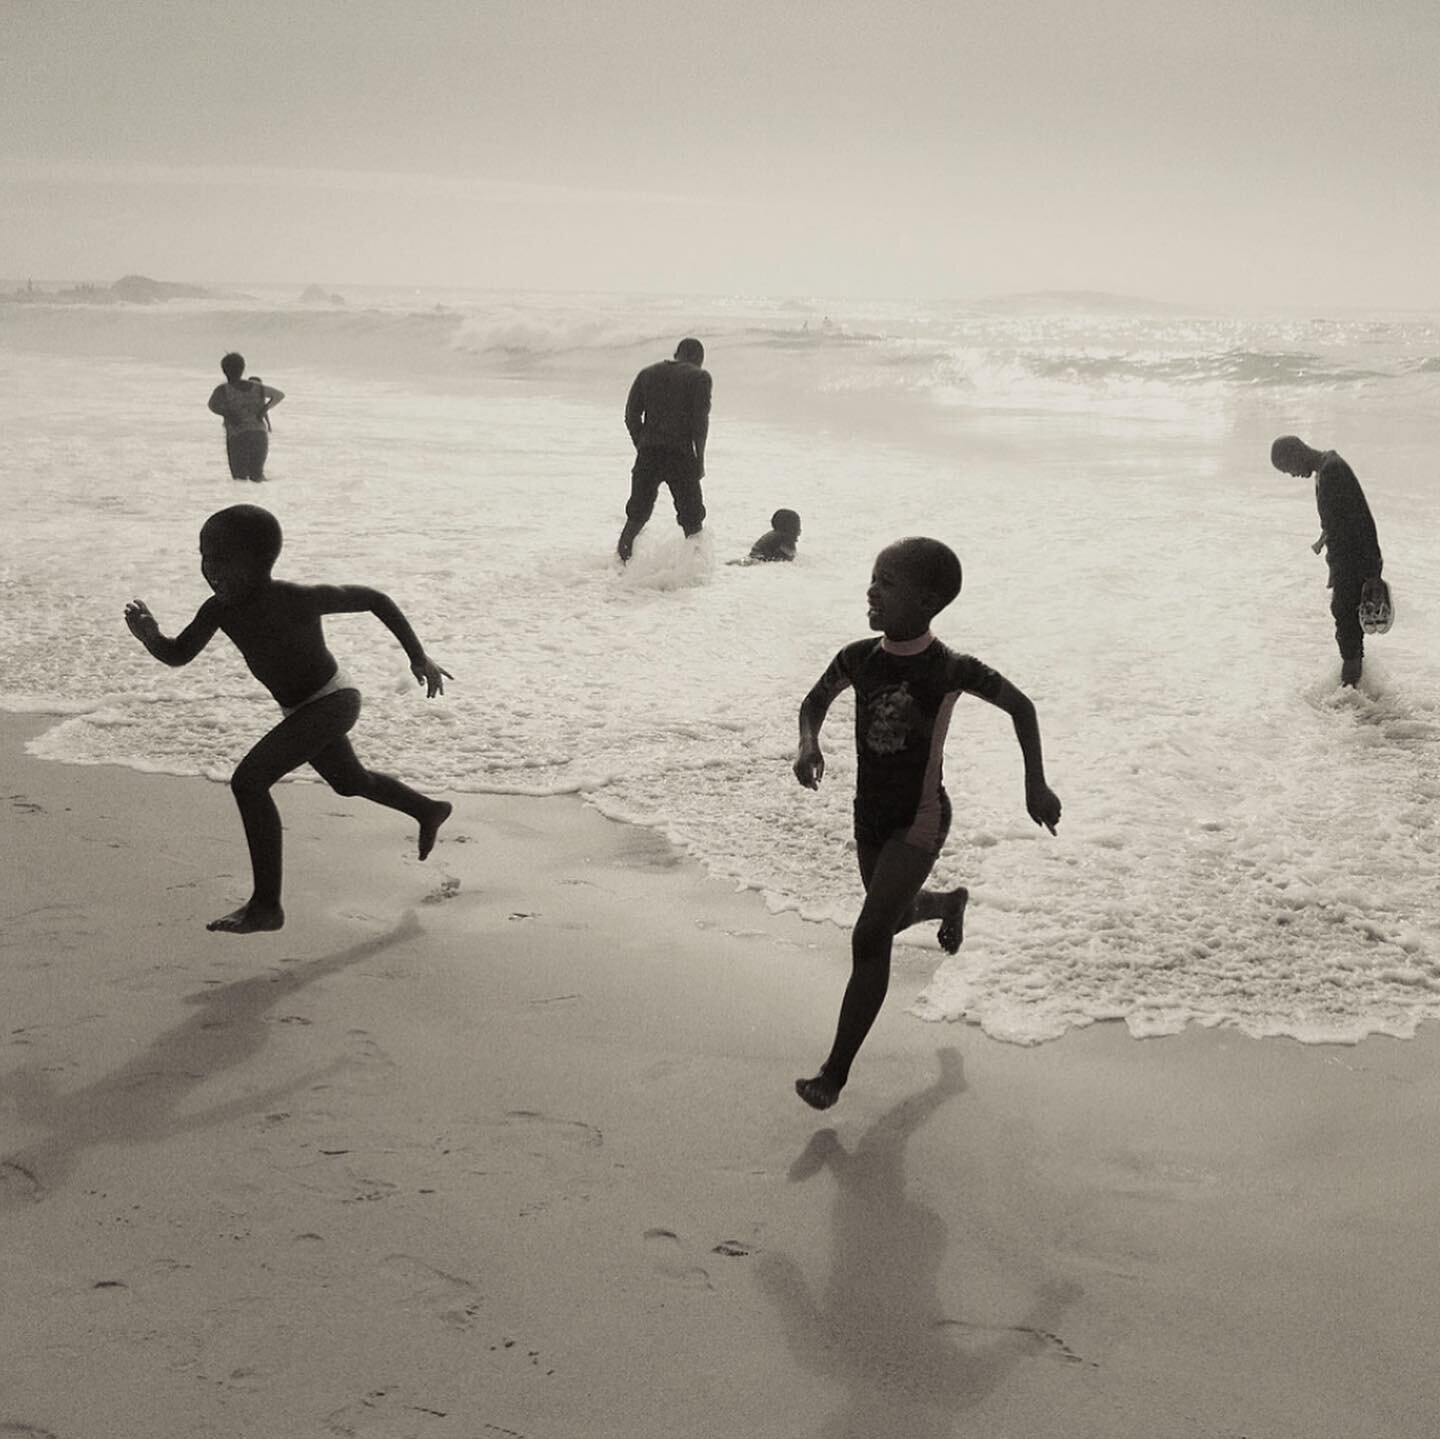 &ldquo;Camps Bay 1st of January 2012, South Africa&rdquo; photography by Peter Krasilnikoff 🦋✨

I love these photos because they remind me of my own childhood&hellip; there is so much joy and peace in them like a safe warm memory 

Water and the oce